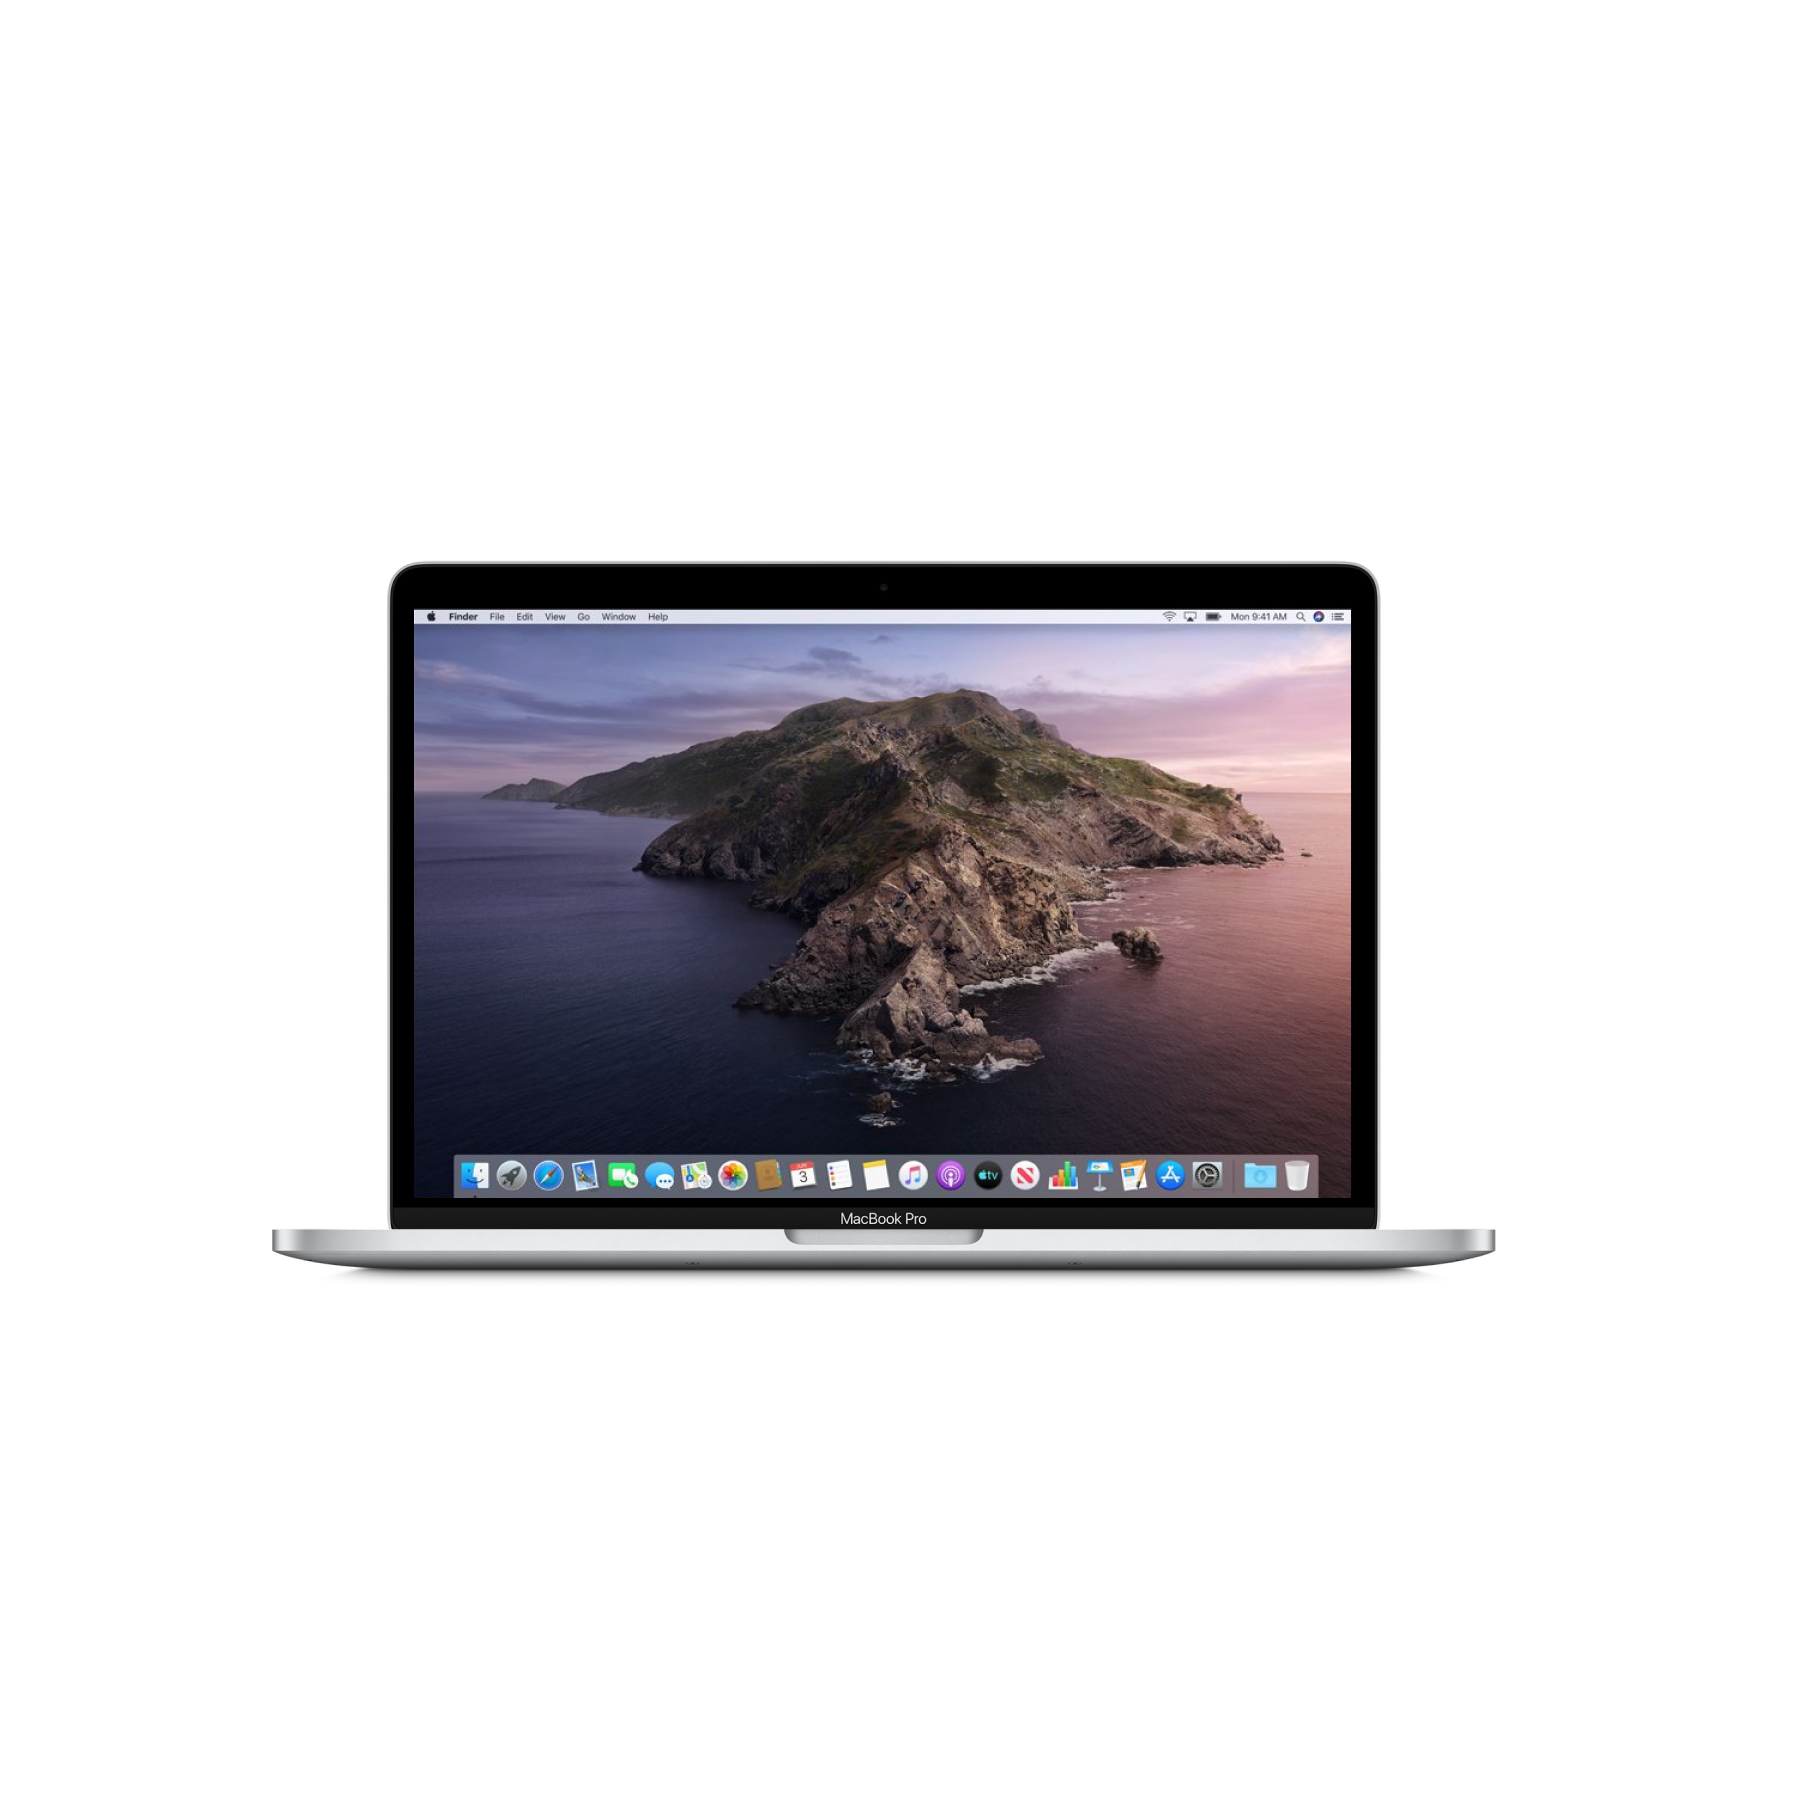 MacBook Pro (13-inch, 2020, Four Thunderbolt 3 ports) 2.0GHz, Intel Core i5 512GB - Silver (Better)